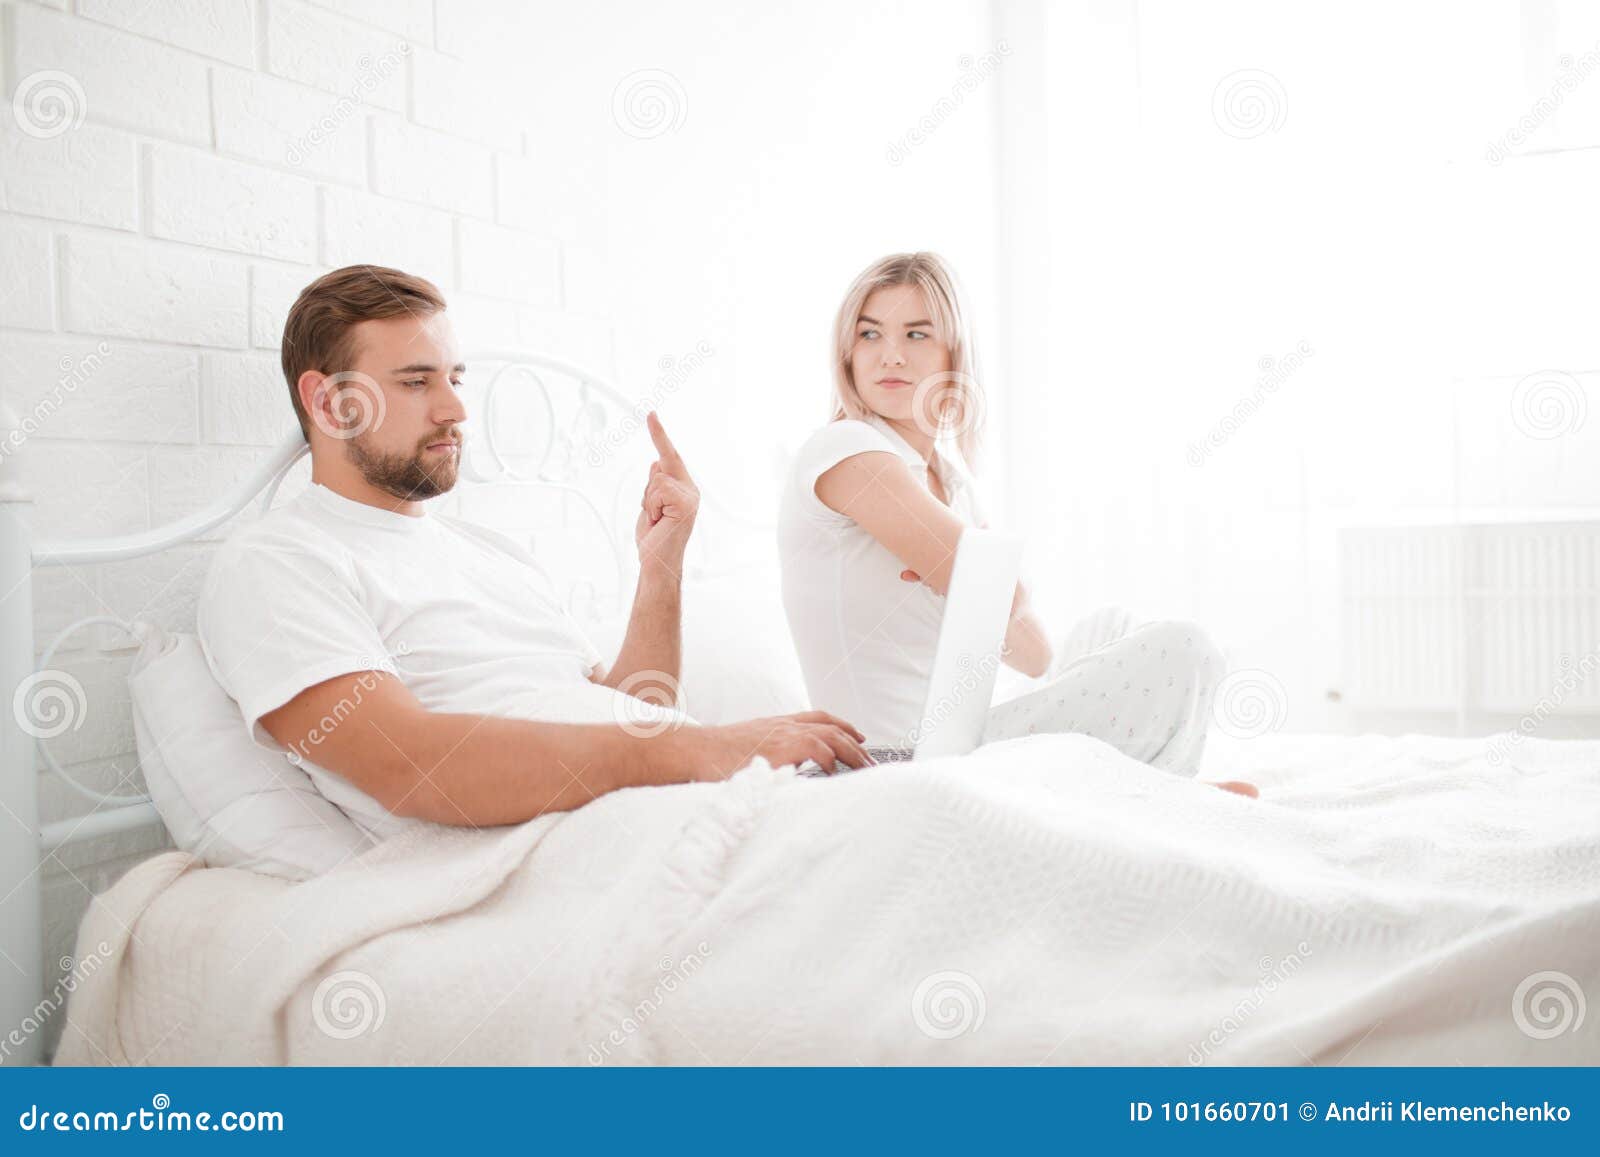 Sensual Young Couple Together in Bed. Angry Couple in Bedroo